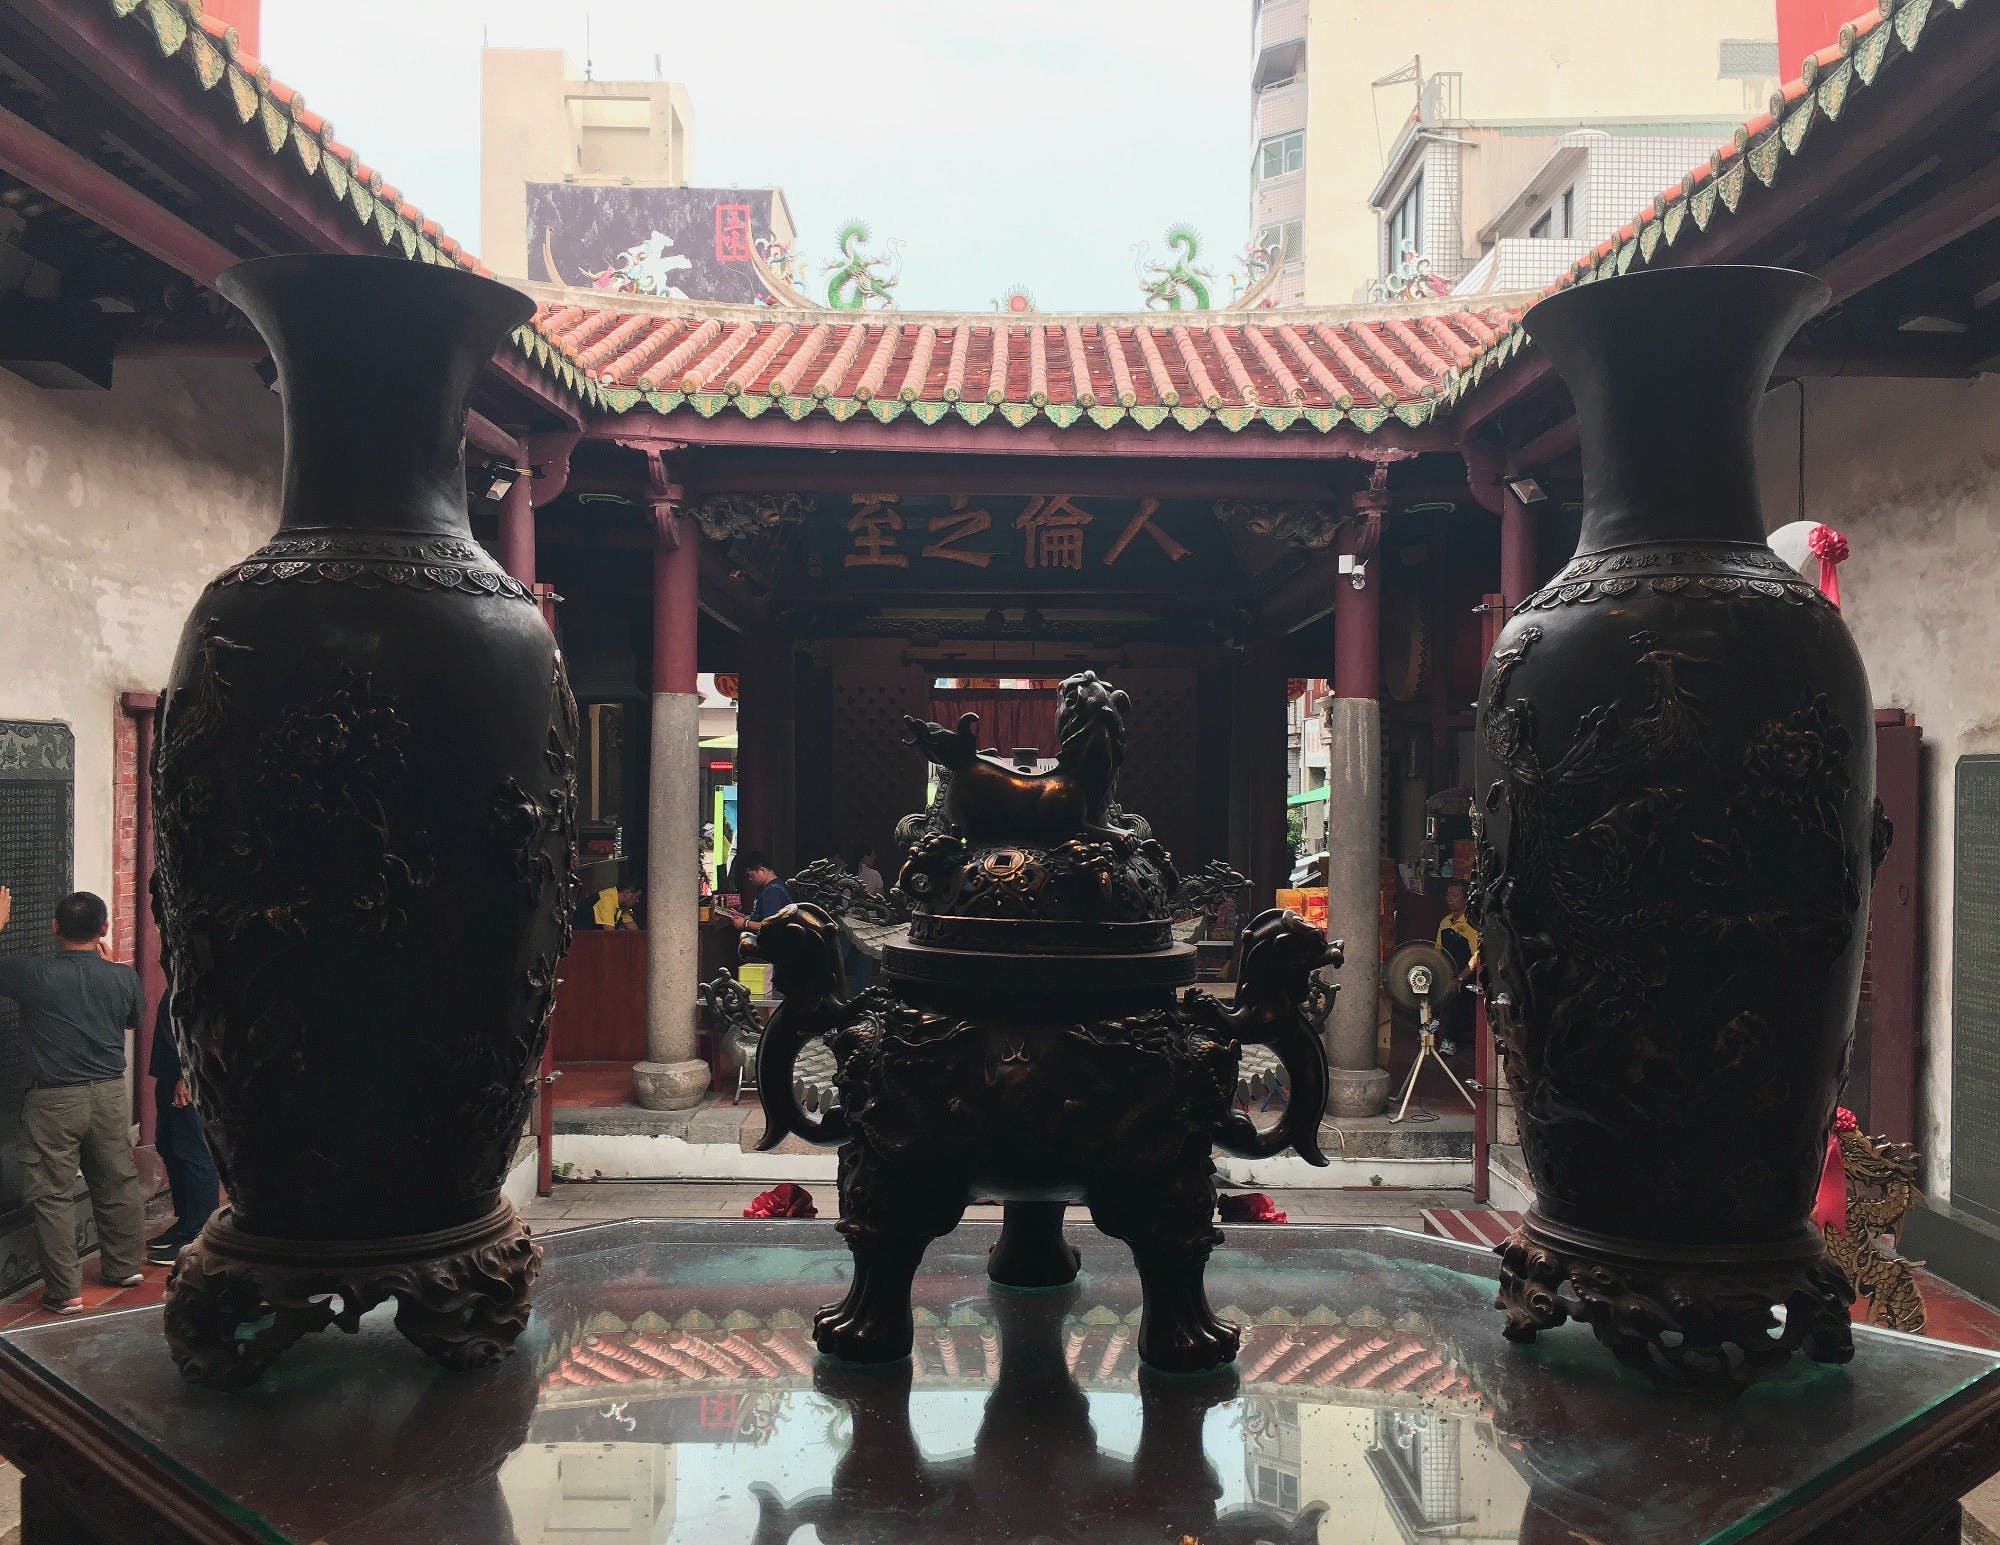 Votive vases in a Taiwanese temple